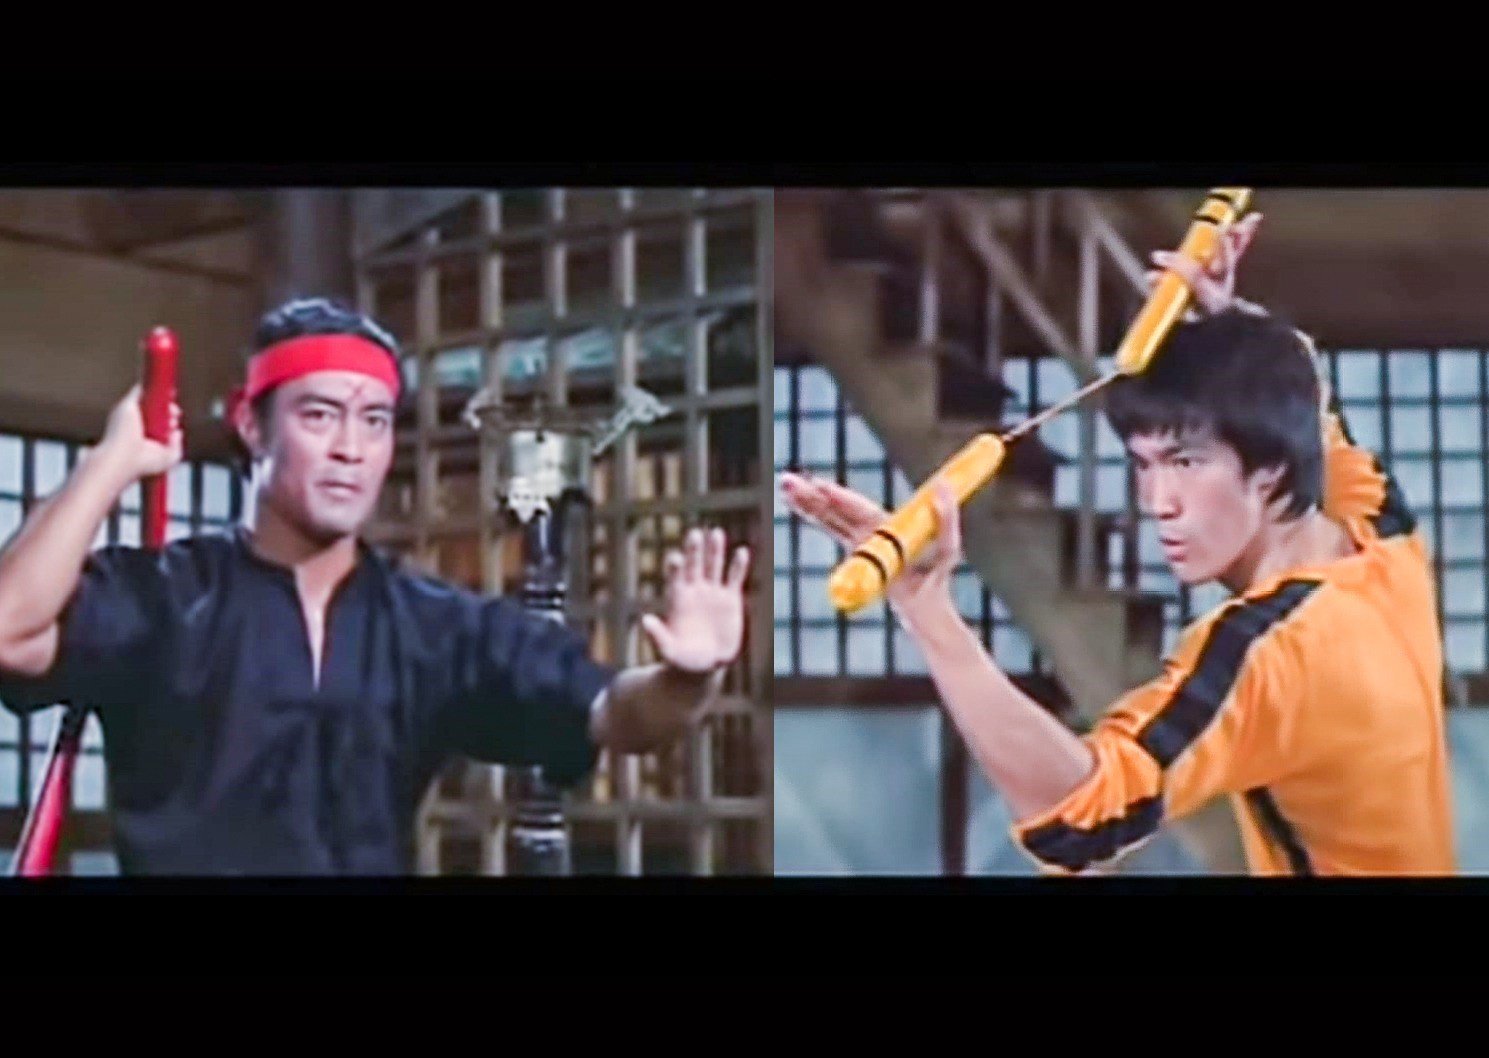 Dan Inosanto and Bruce Lee in ‘Game of Death’. Photo: YouTube